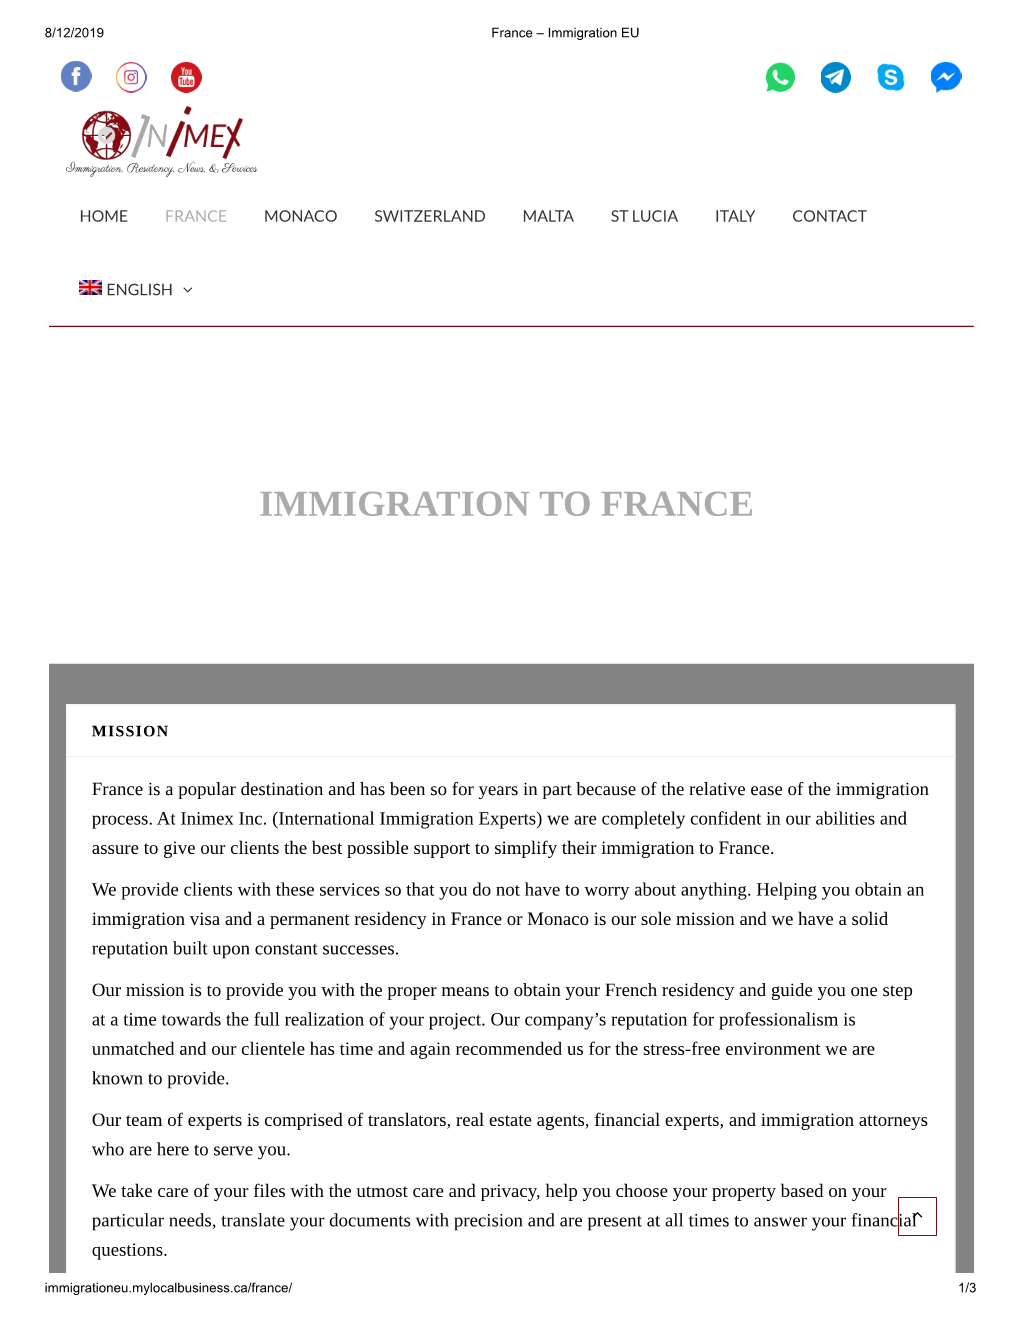 Immigration to France